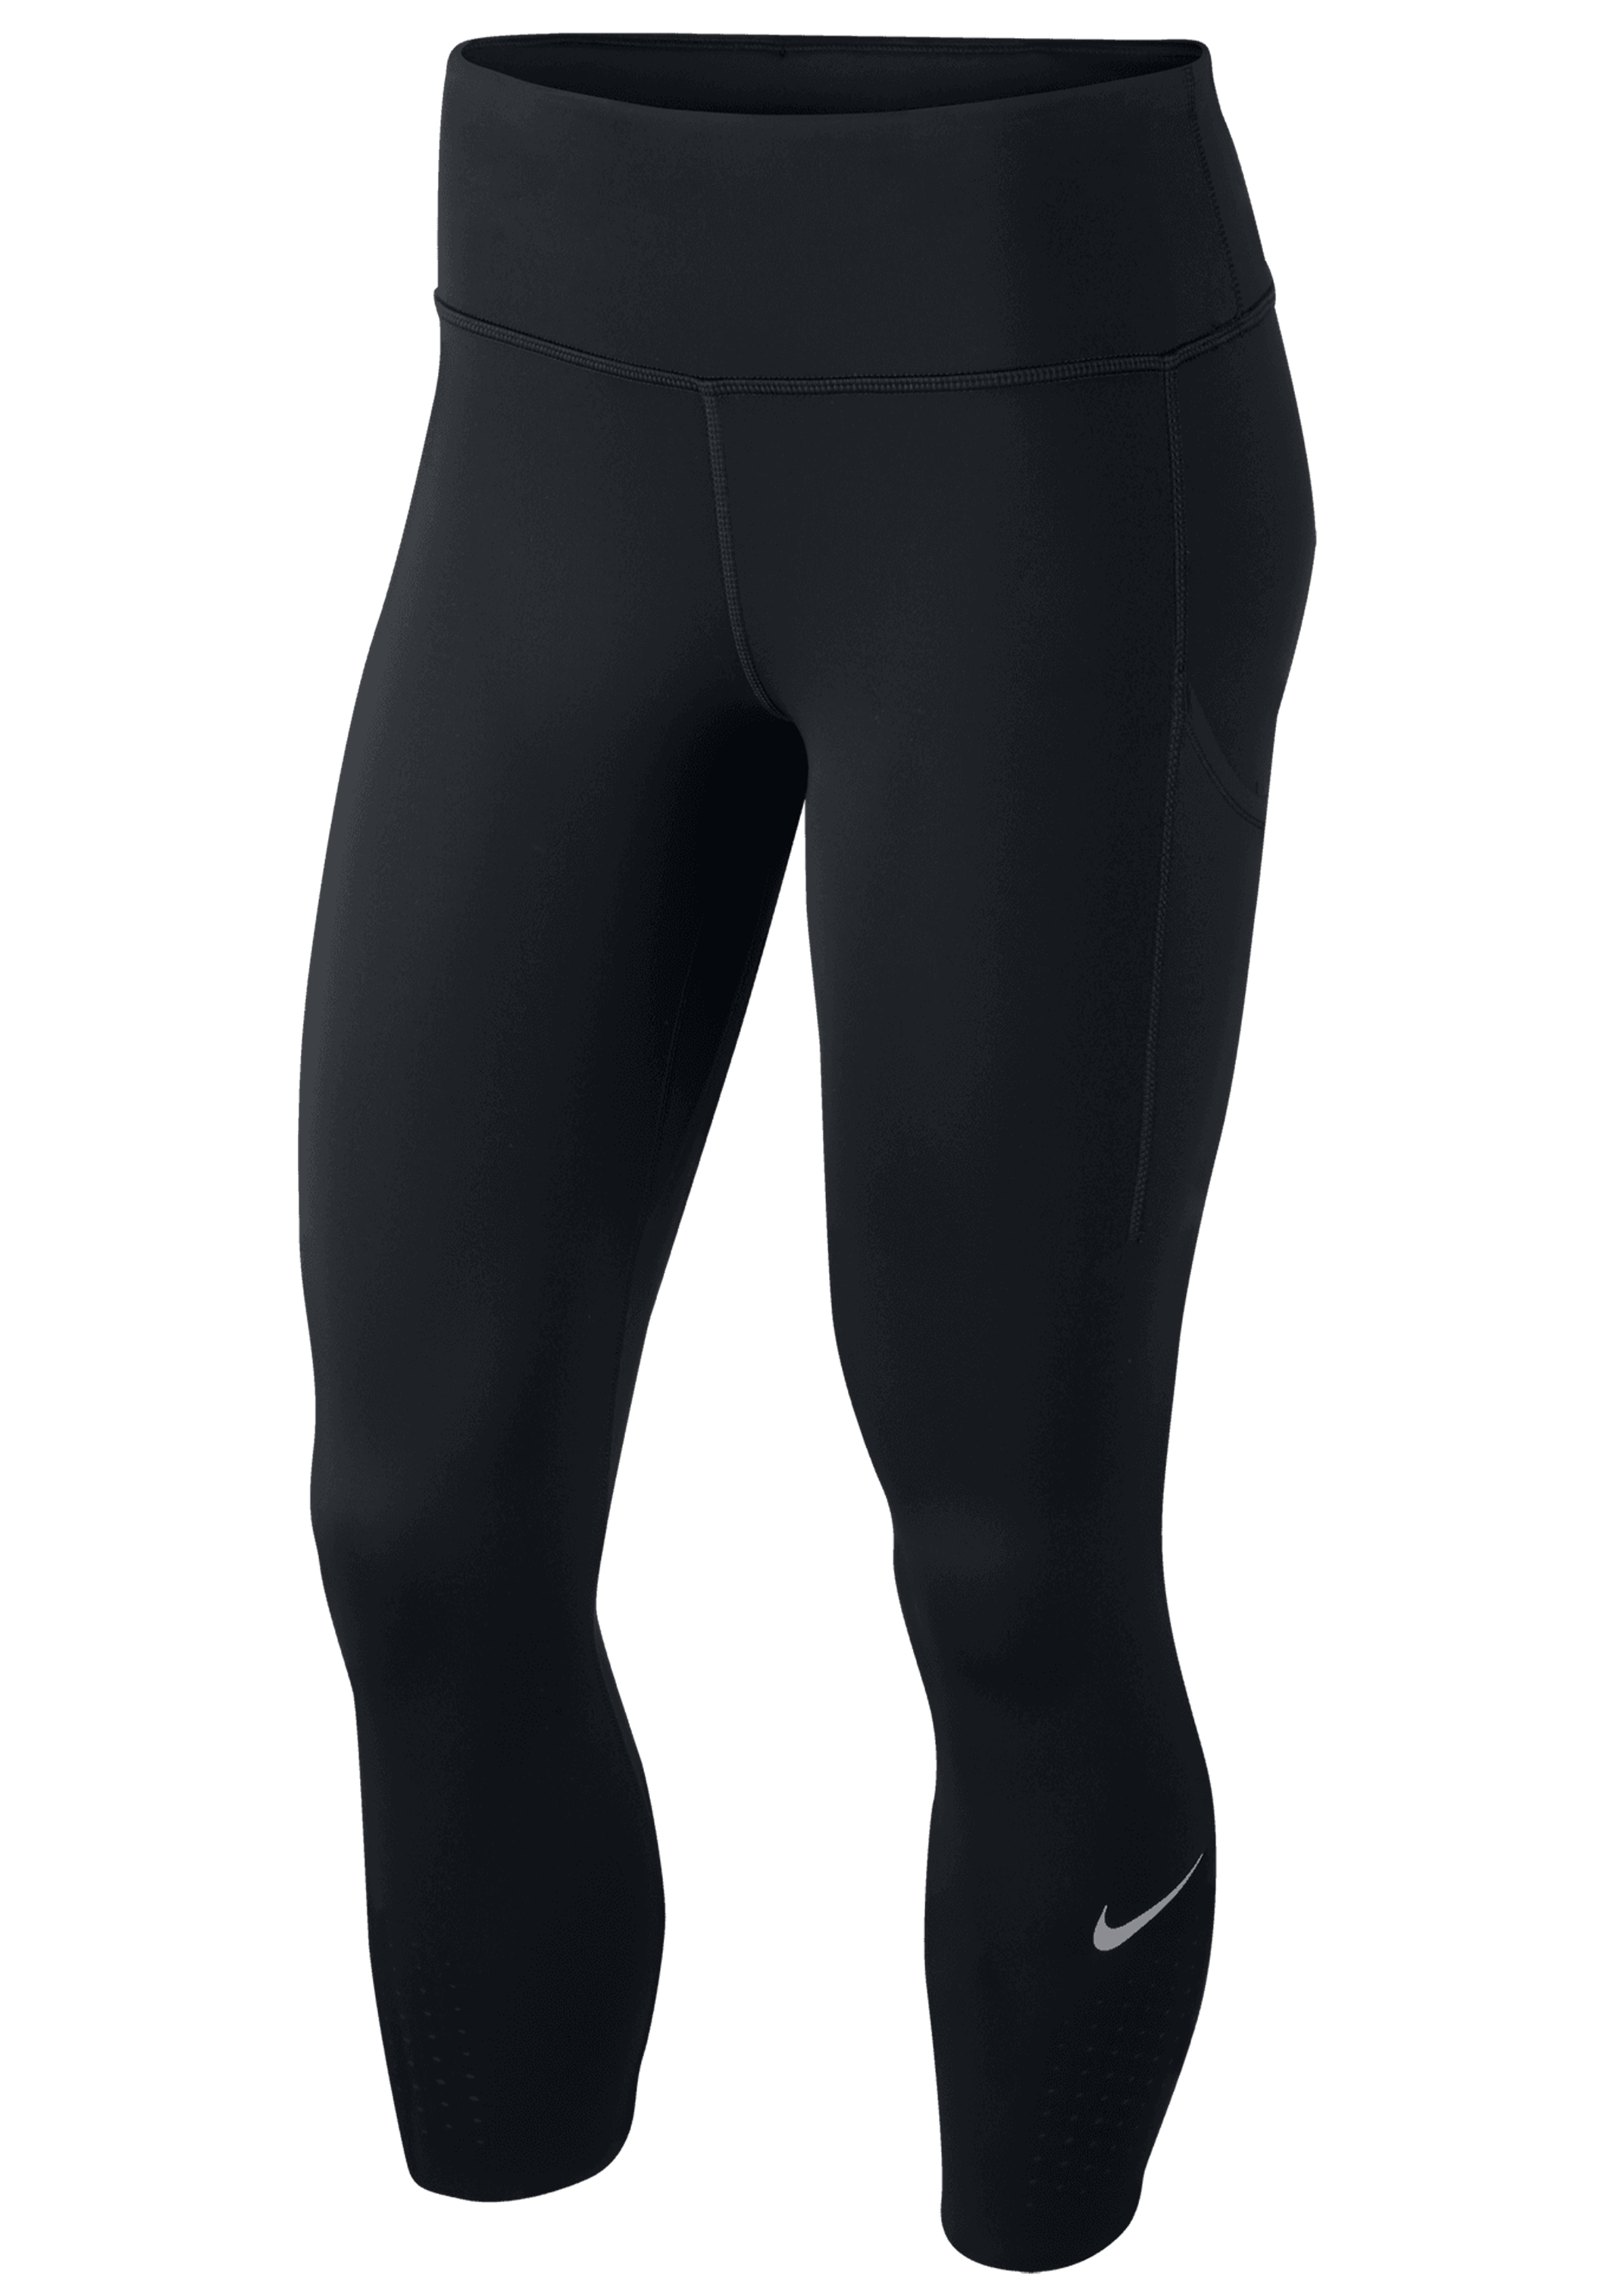 Nike Womens Epic Luxe Tights Mid-Rise Crop CN8043 010 – Jim Kidd